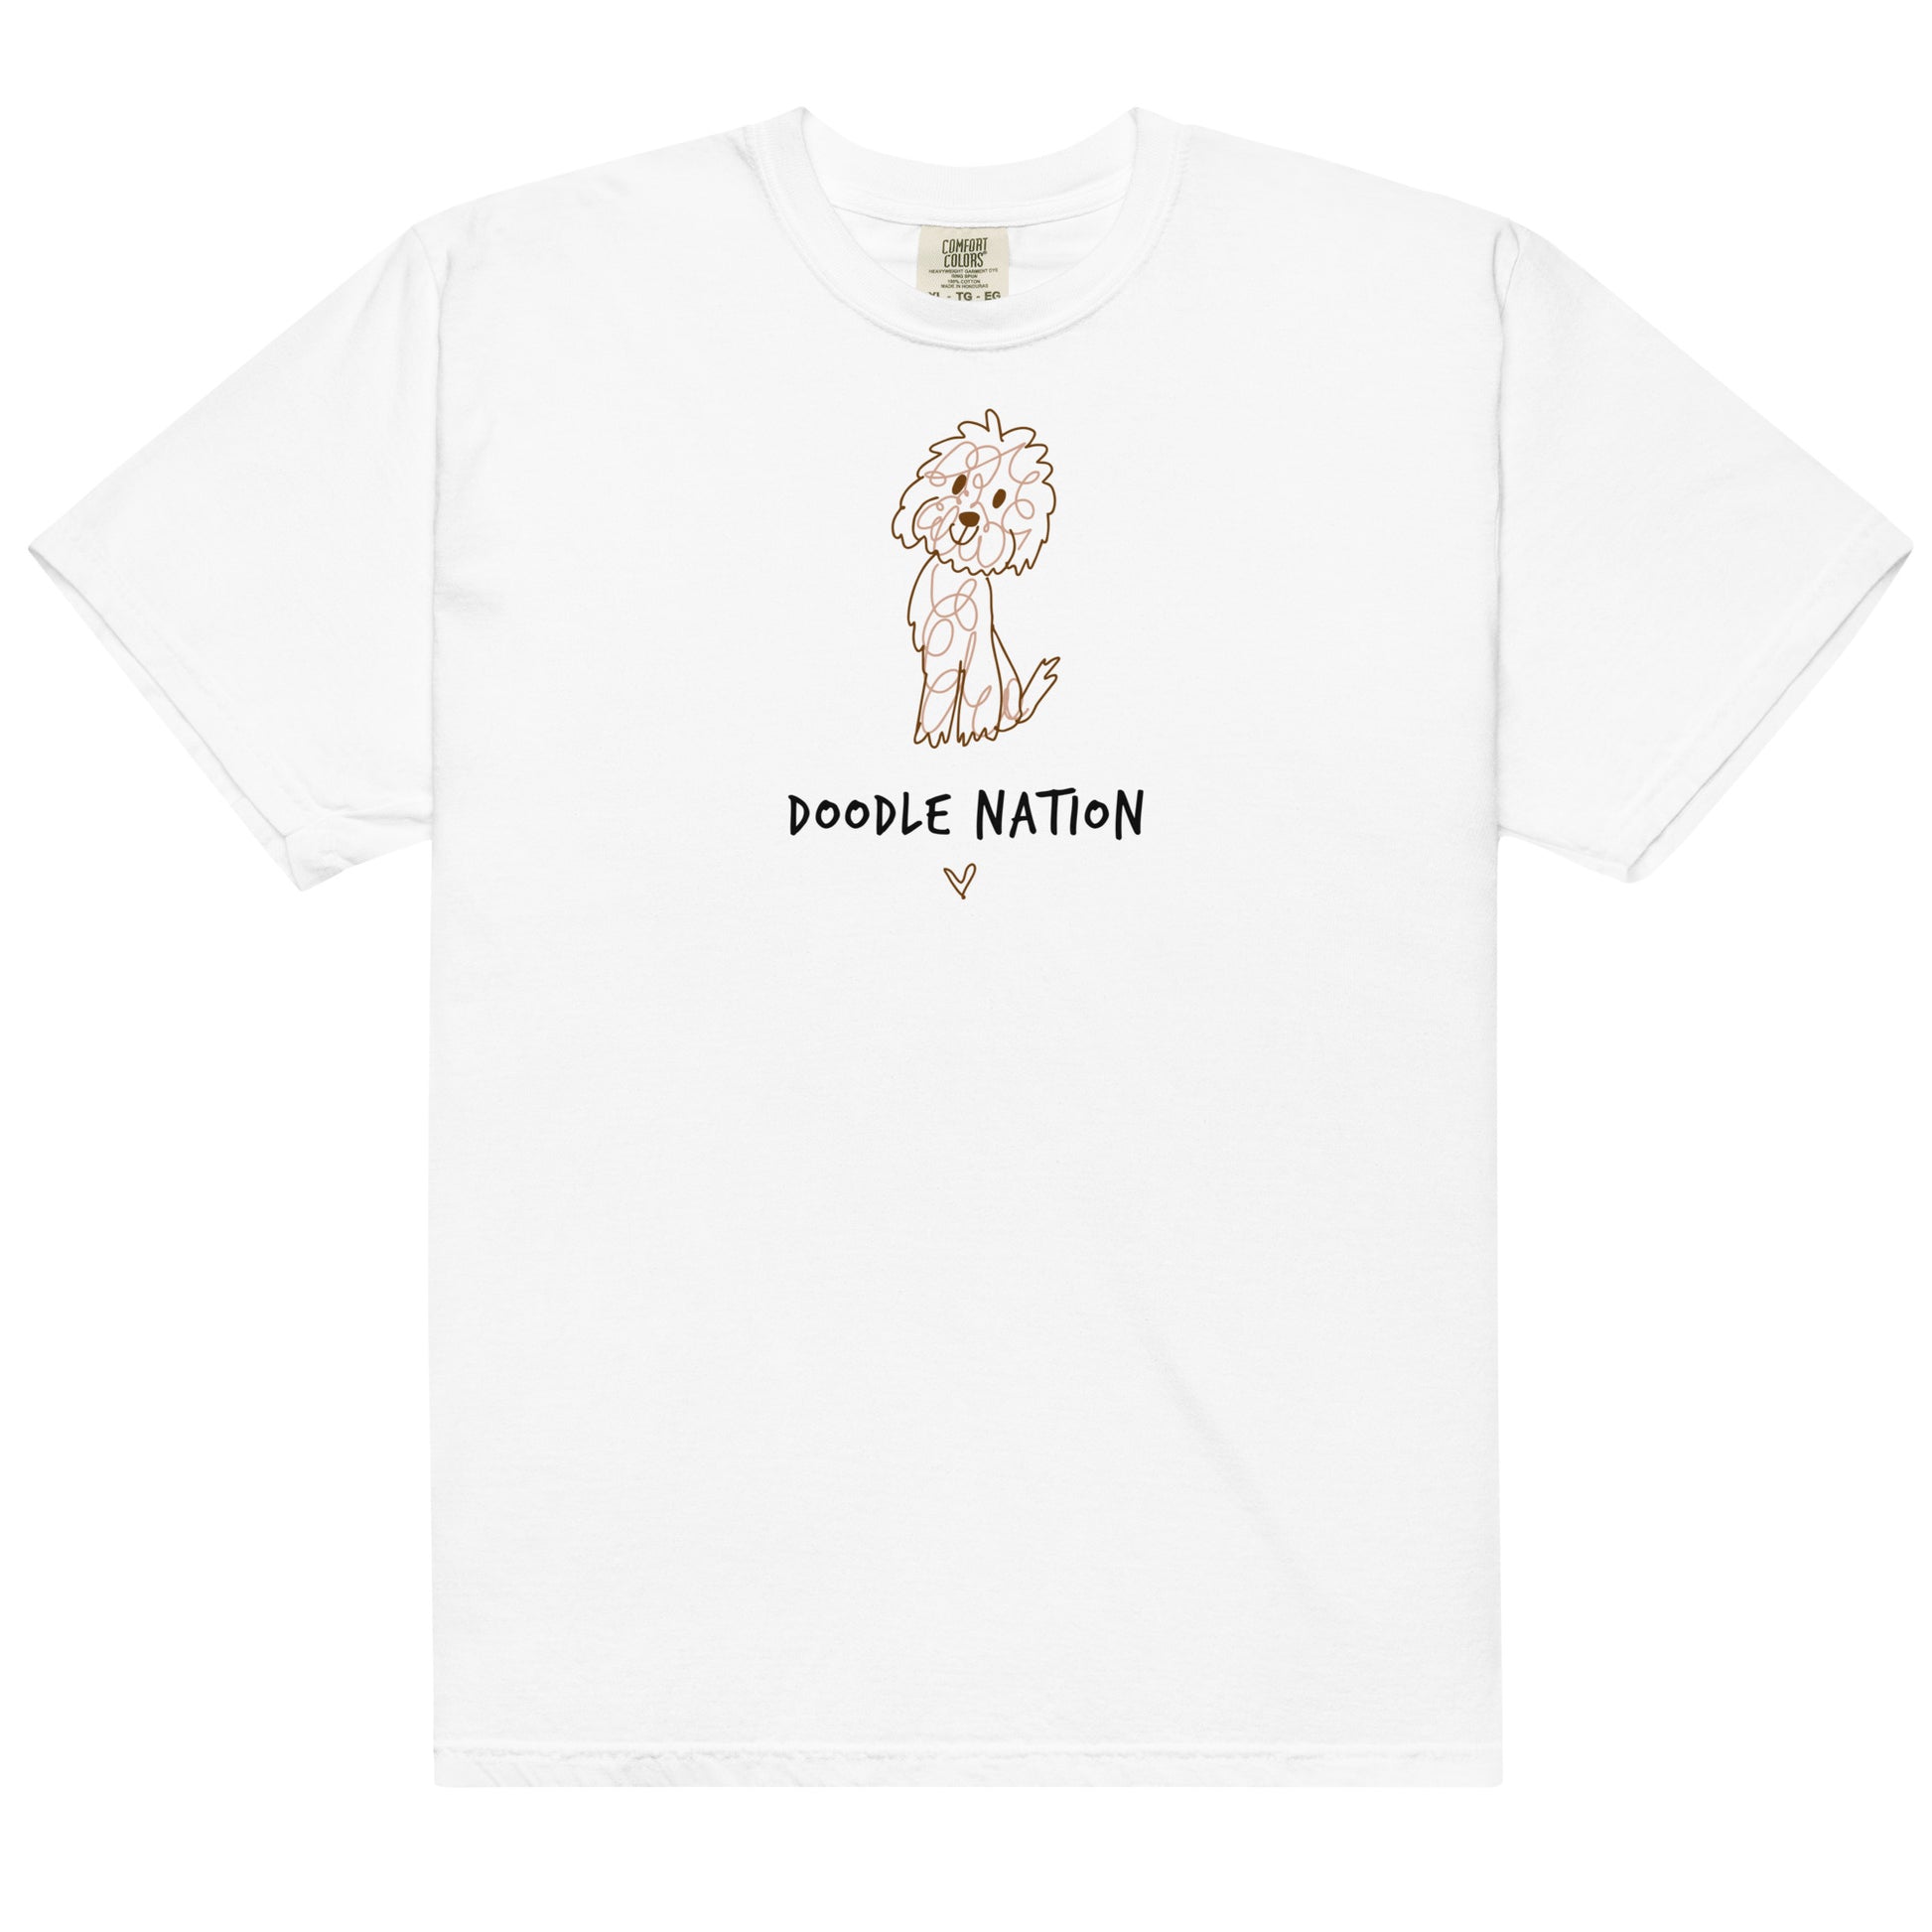 White comfort color t-shirt with hand drawn dog design and saying Doodle Nation